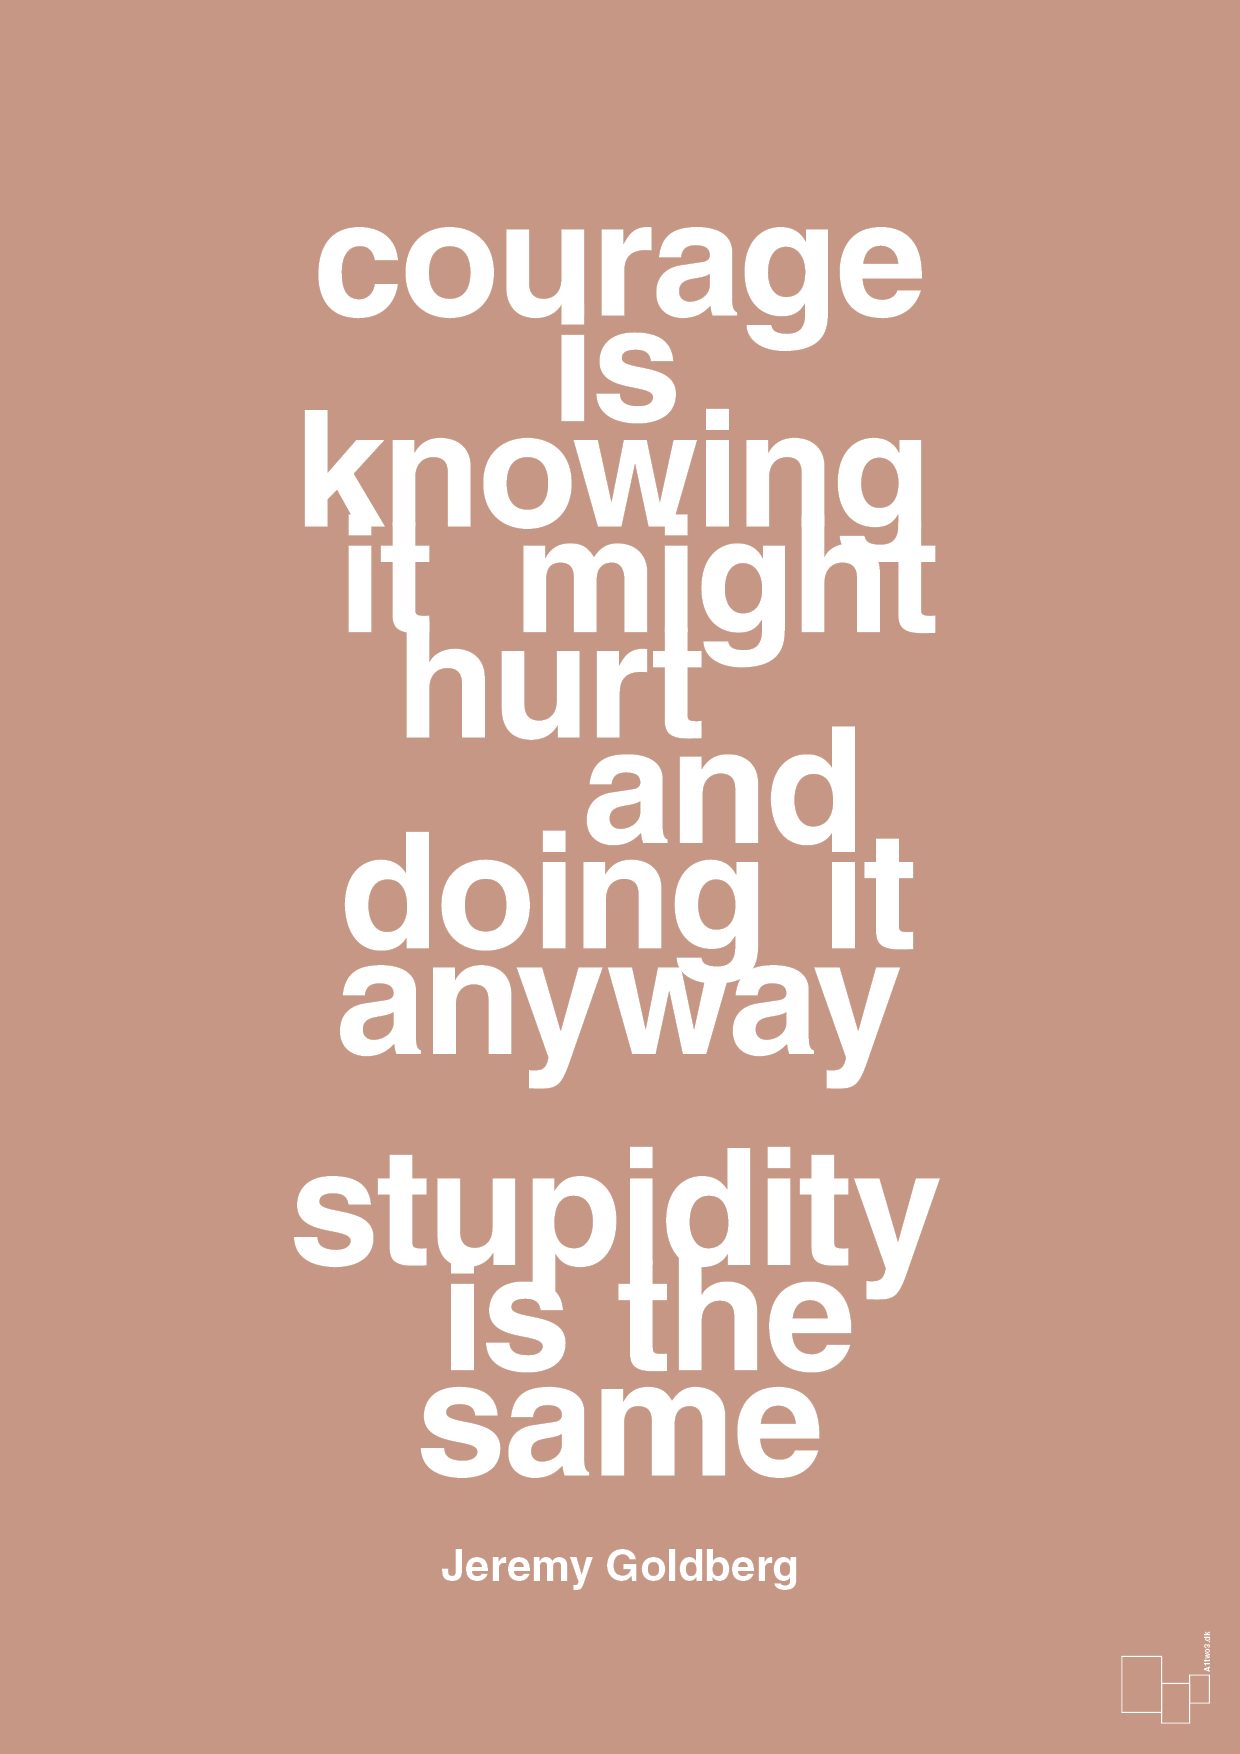 courage is knowing it might hurt and doing it anyway stupidity is the same - Plakat med Citater i Powder